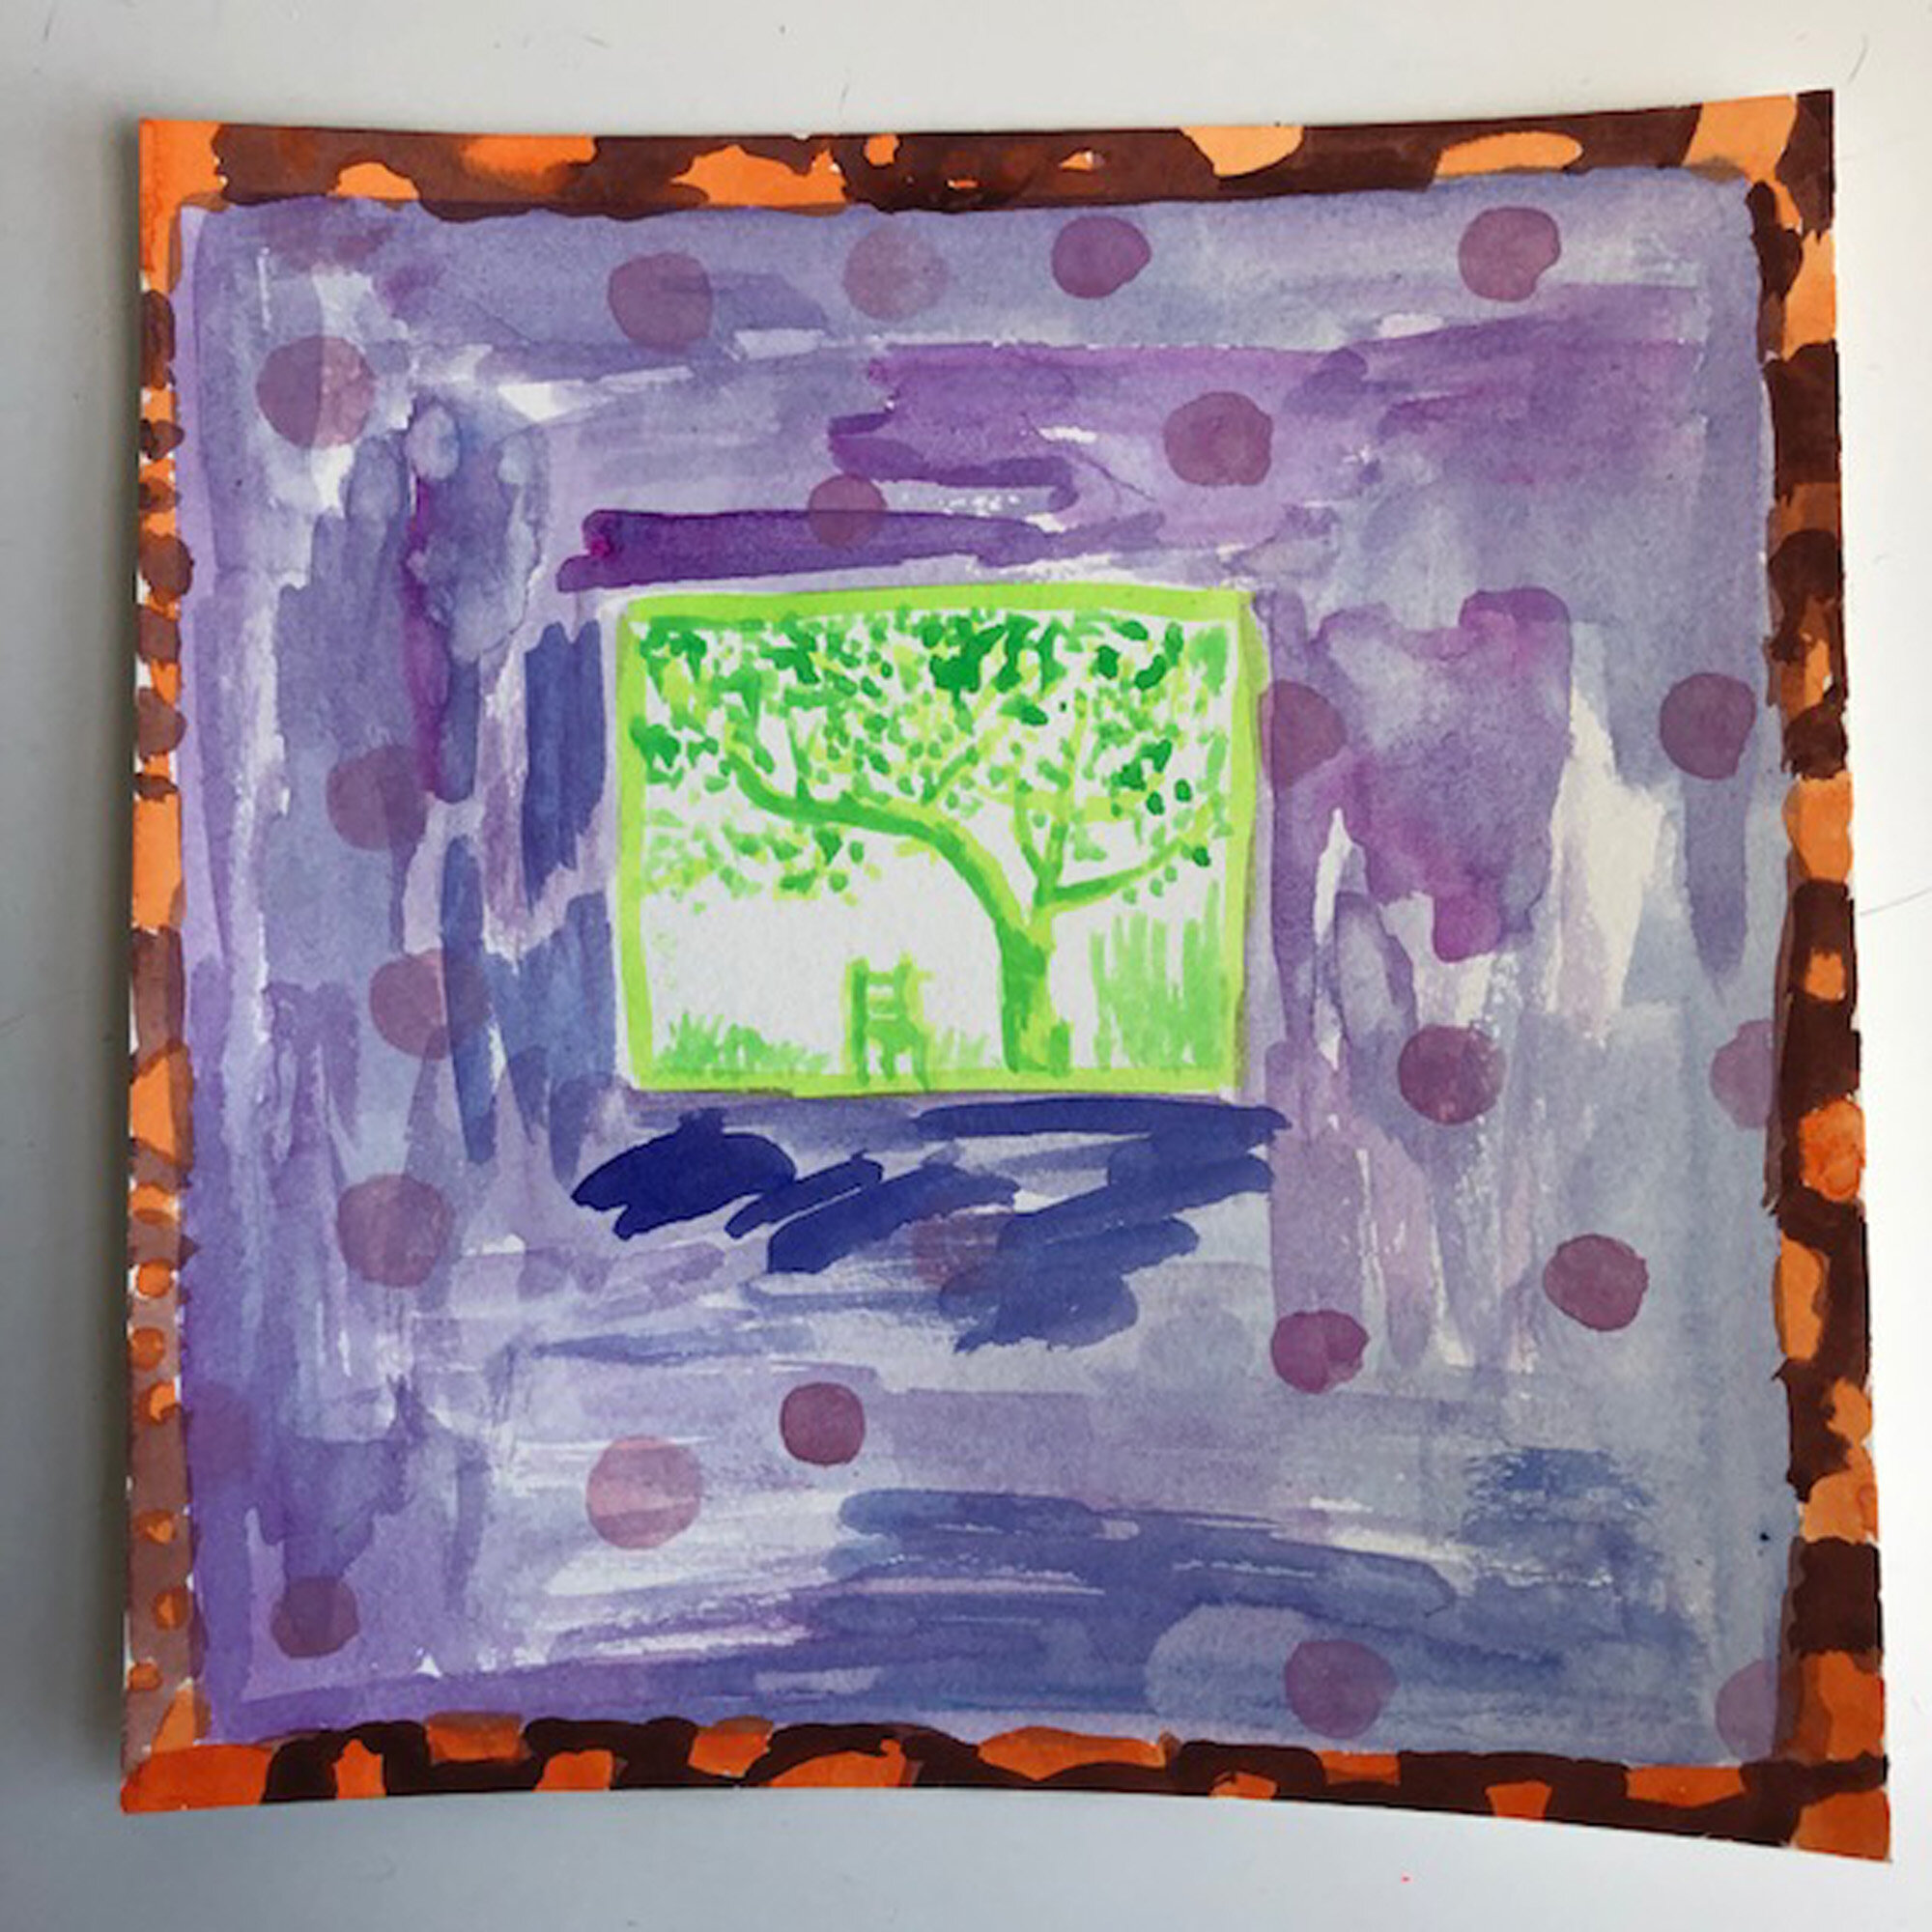  Nora Griffin, Tree Outside My Window, 2020, Gouache on paper, 8" x 8"